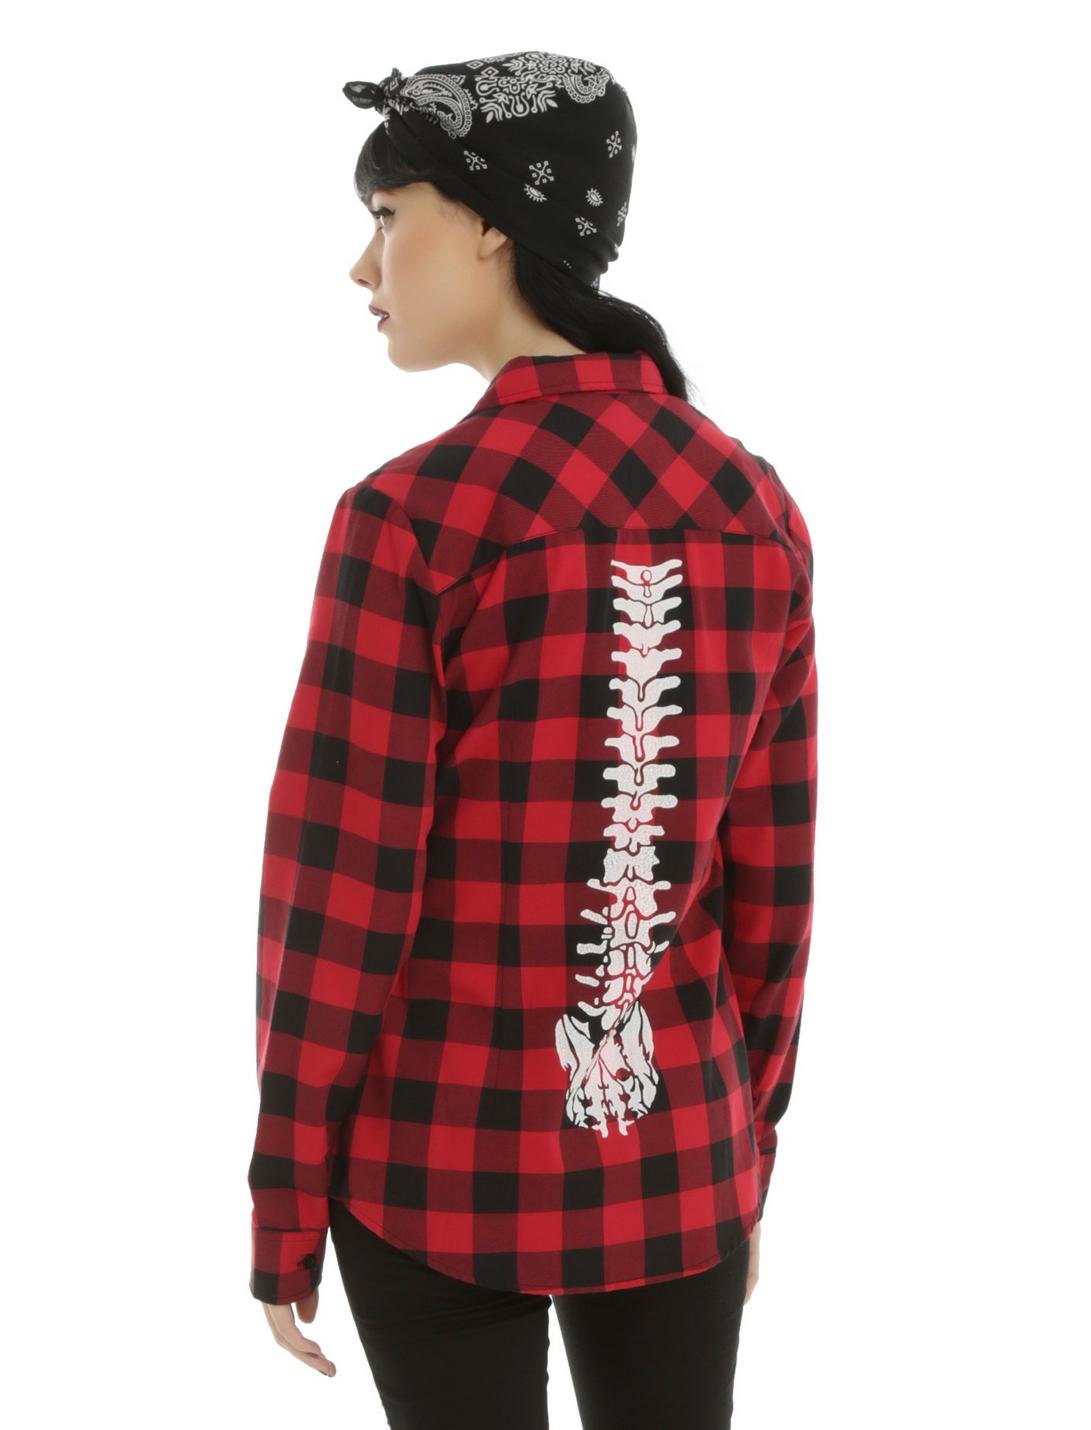 Red & Black Plaid Spine Back Girls Woven Button-Up | Hot Topic